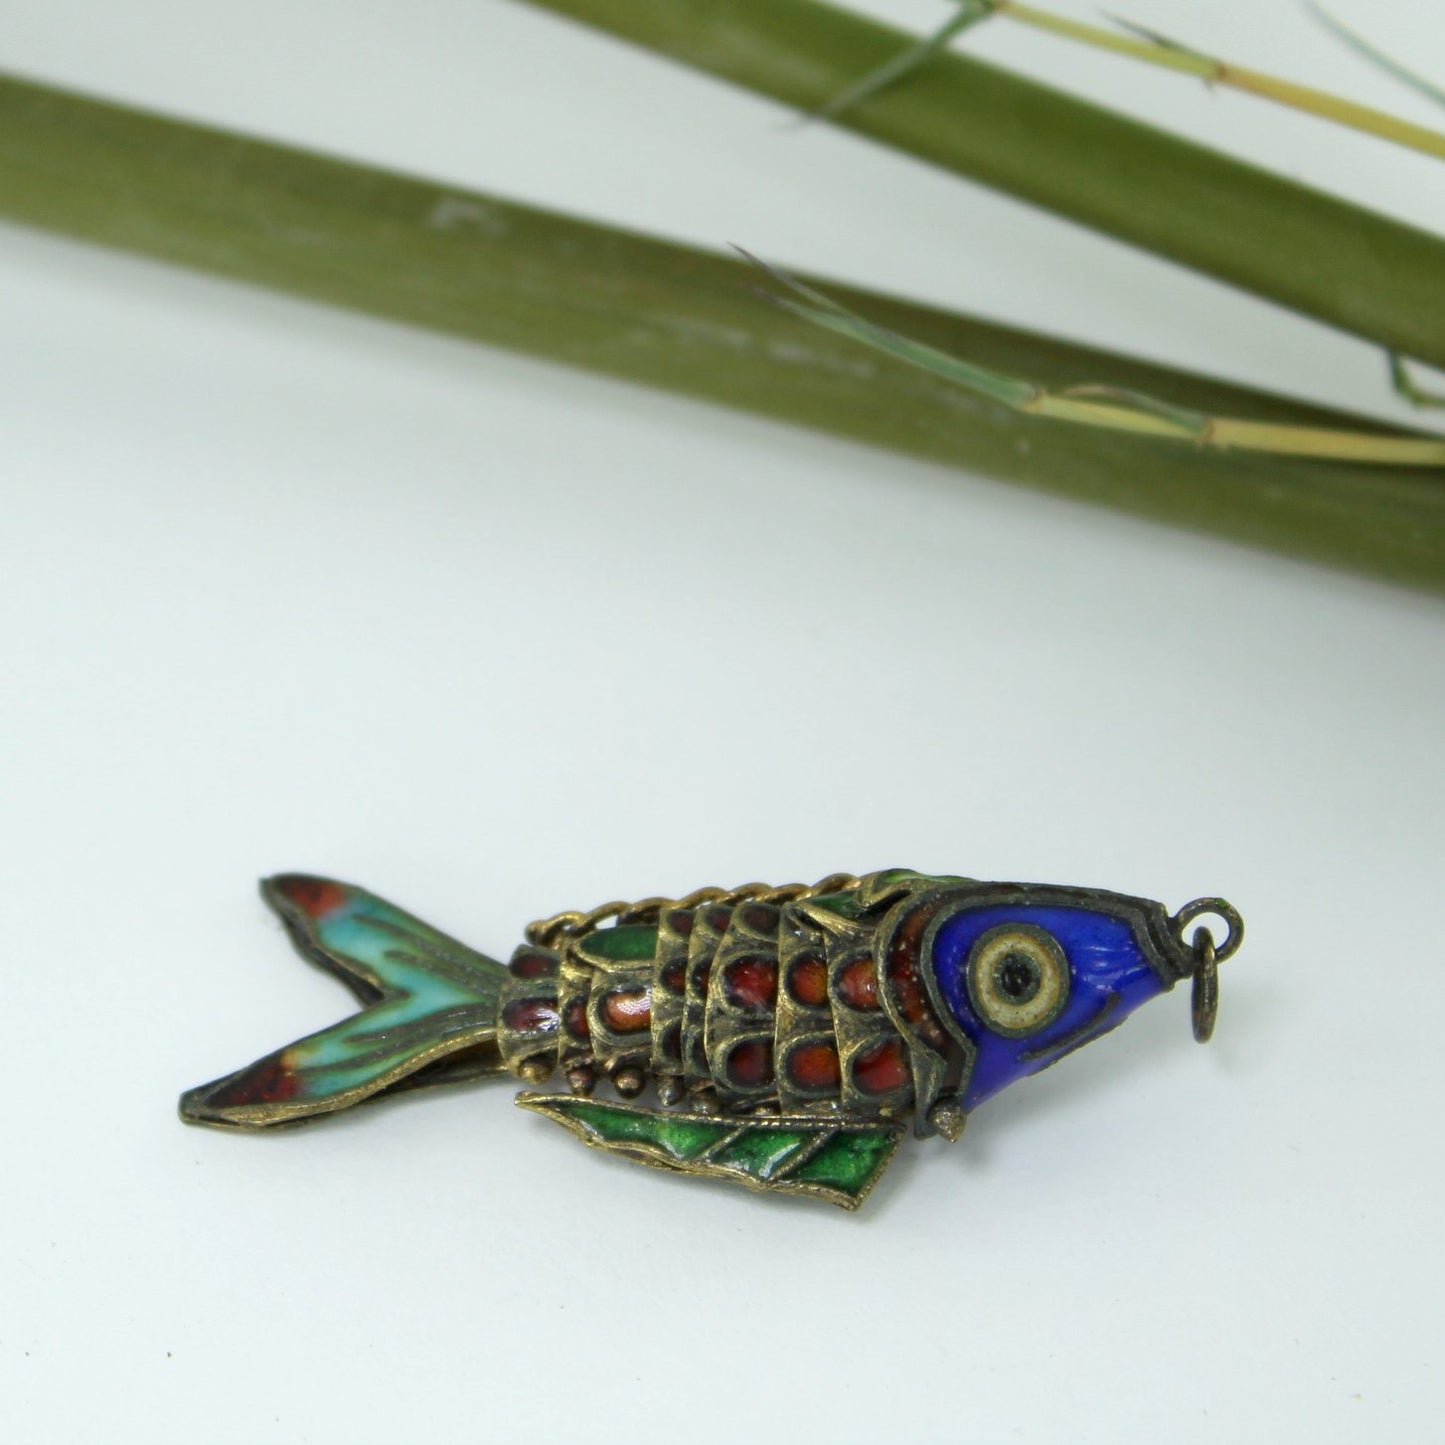 Enamel Cloisonne Pendant Articulated Fish Colorful Cobalt Aqua Green Red side view fish